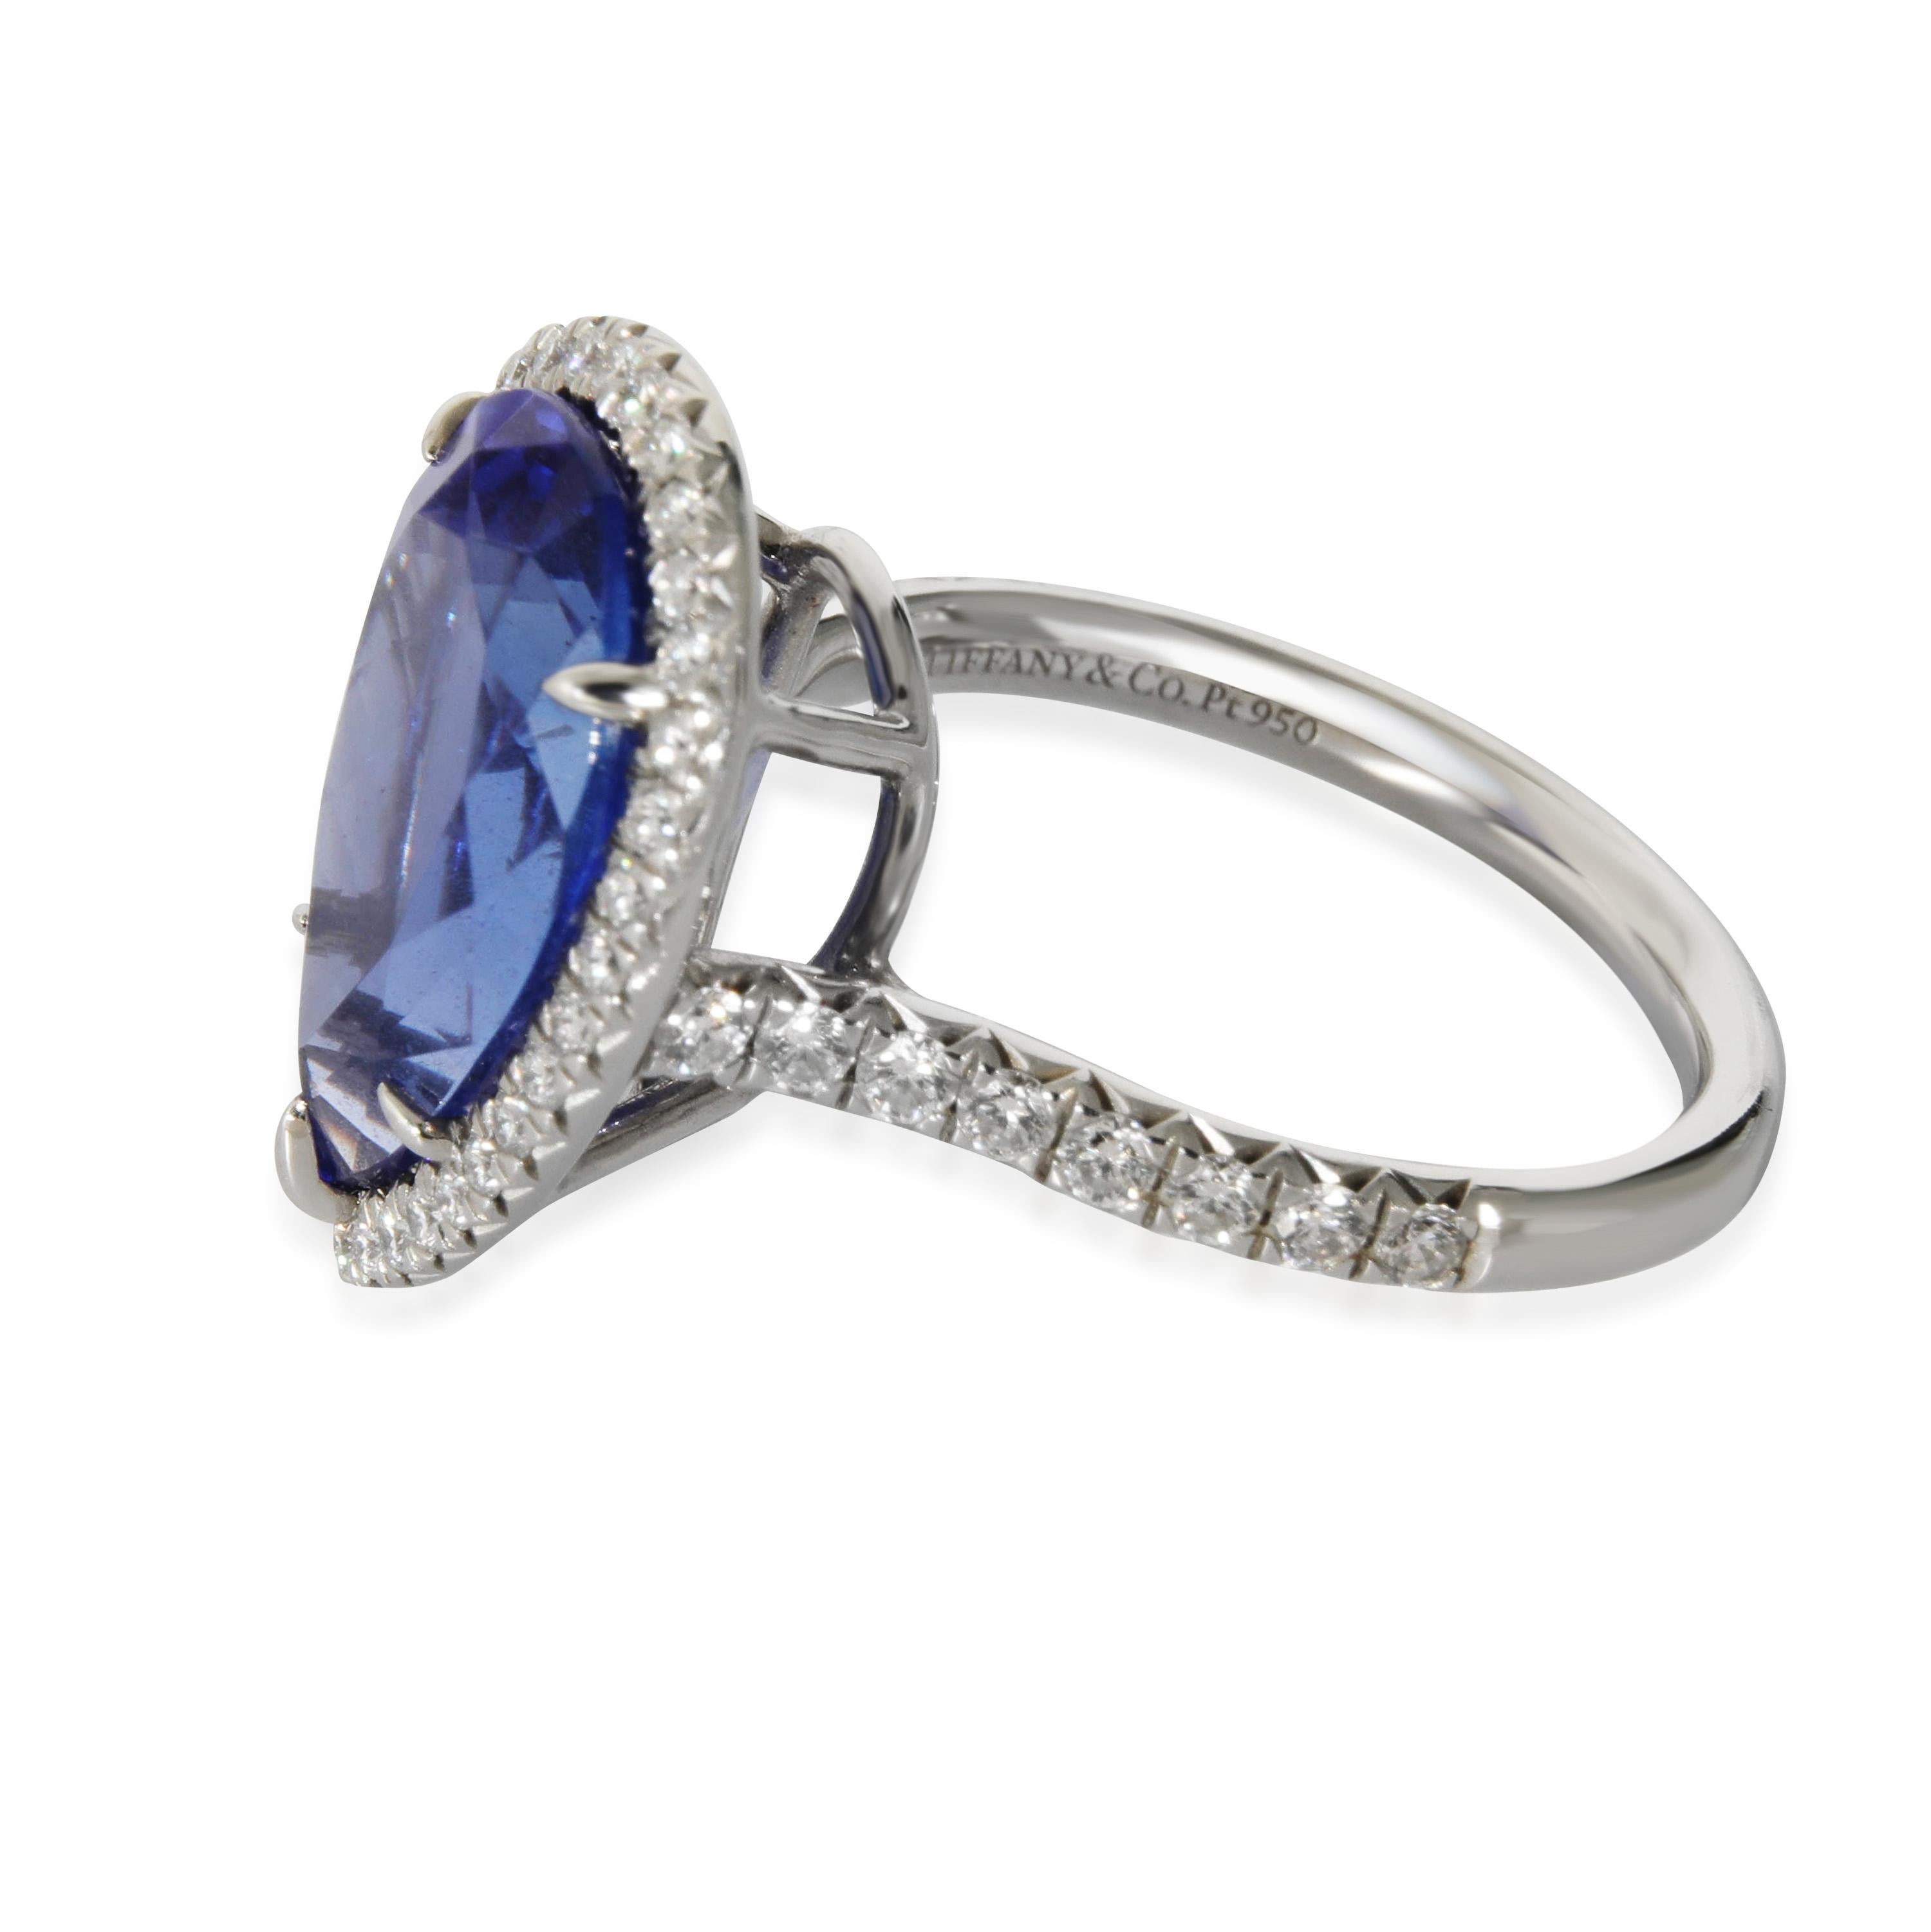 Tiffany & Co. Soleste Pear Tanzanite in Platinum 5.90 CT

PRIMARY DETAILS
SKU: 132015
Listing Title: Tiffany & Co. Soleste Pear Tanzanite in Platinum 5.90 CT
Condition Description: Tiffany & Co. looks to the sun to inspire the Soleste collection.